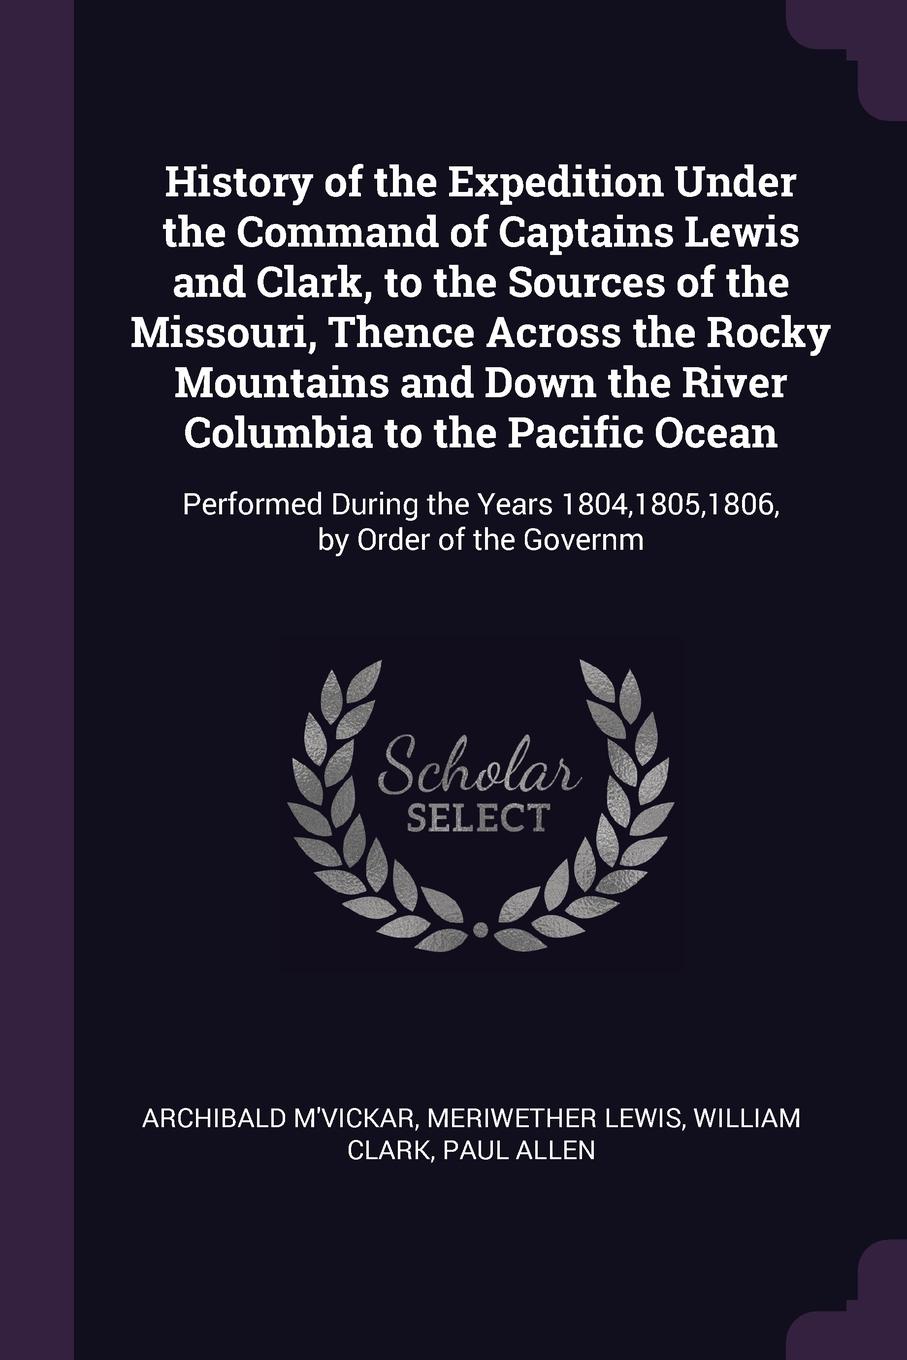 History of the Expedition Under the Command of Captains Lewis and Clark, to the Sources of the Missouri, Thence Across the Rocky Mountains and Down the River Columbia to the Pacific Ocean. Performed During the Years 1804,1805,1806, by Order of the...